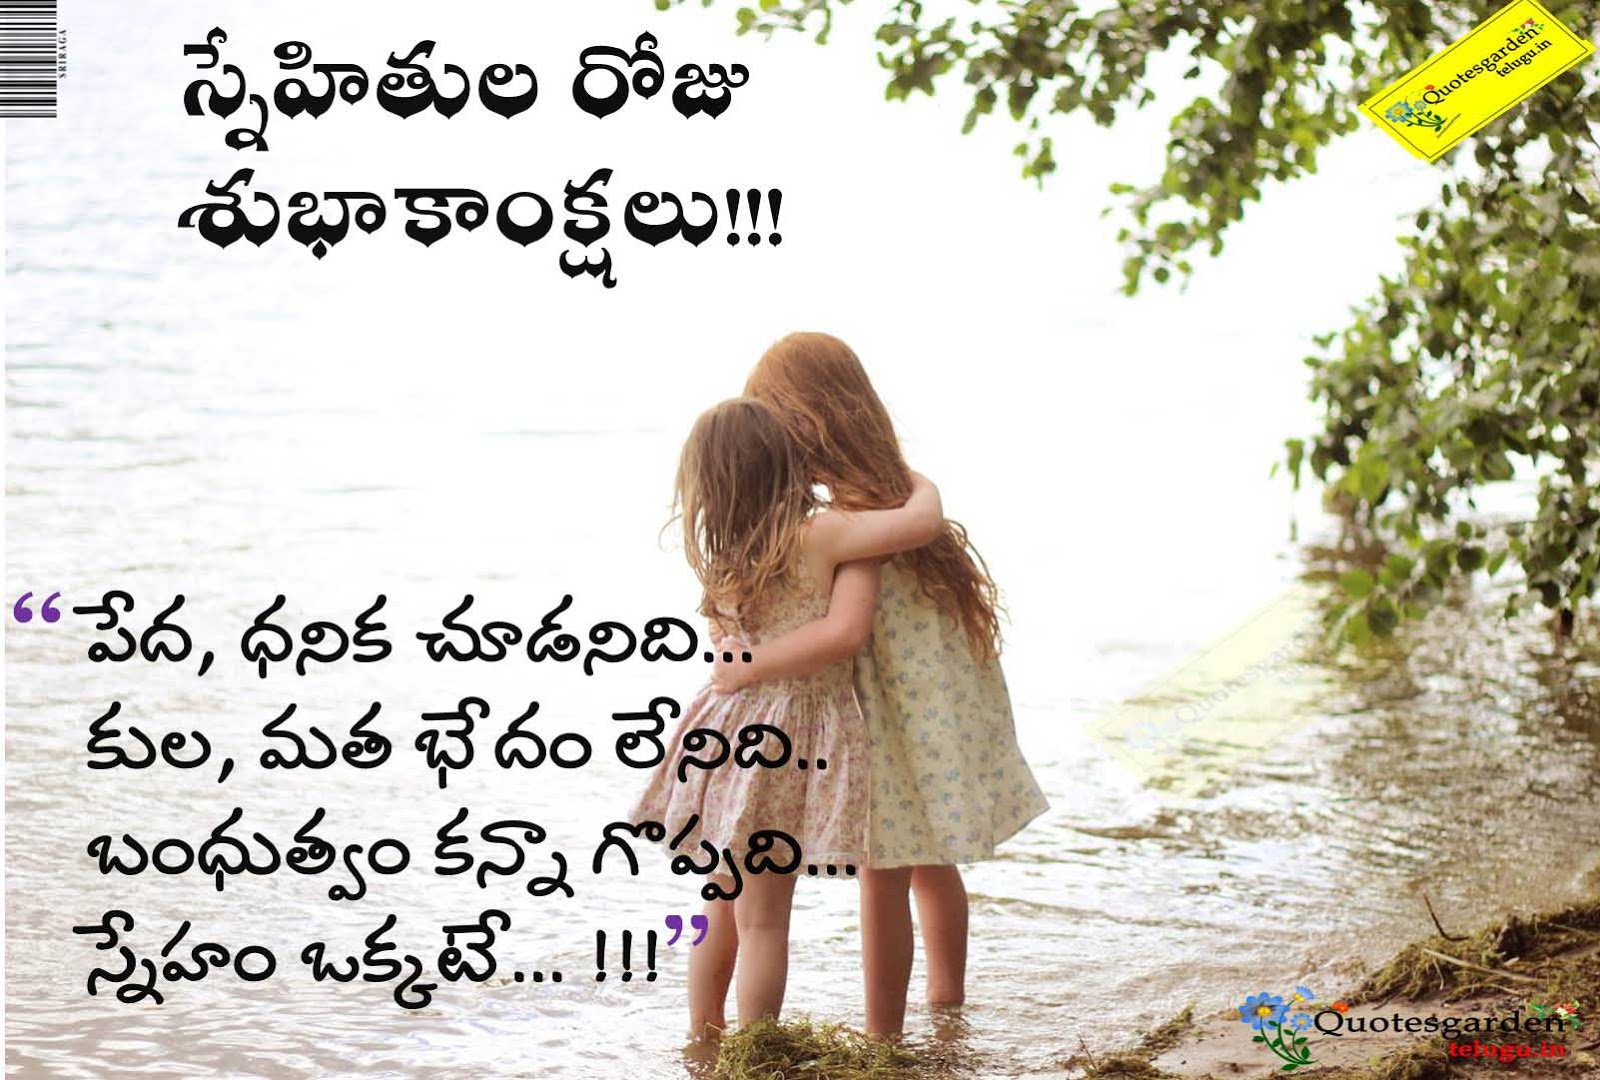 Friendship day telugu quotes Wishes Greetings Images Wallpapers ...